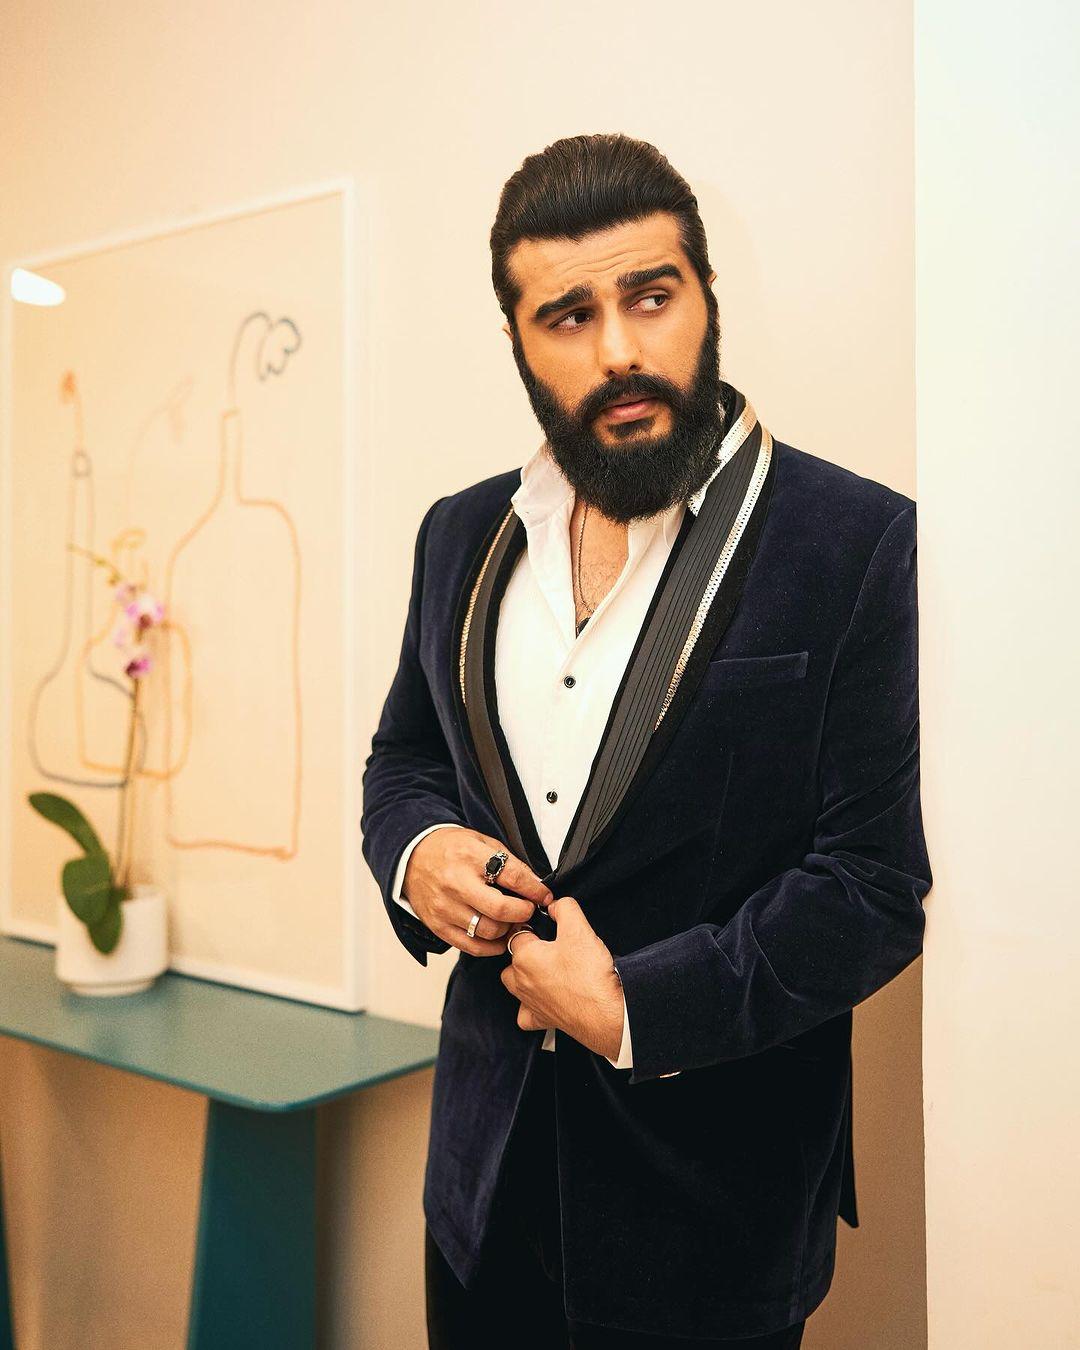 Arjun Kapoor styled his hair back in a slicked-back look.